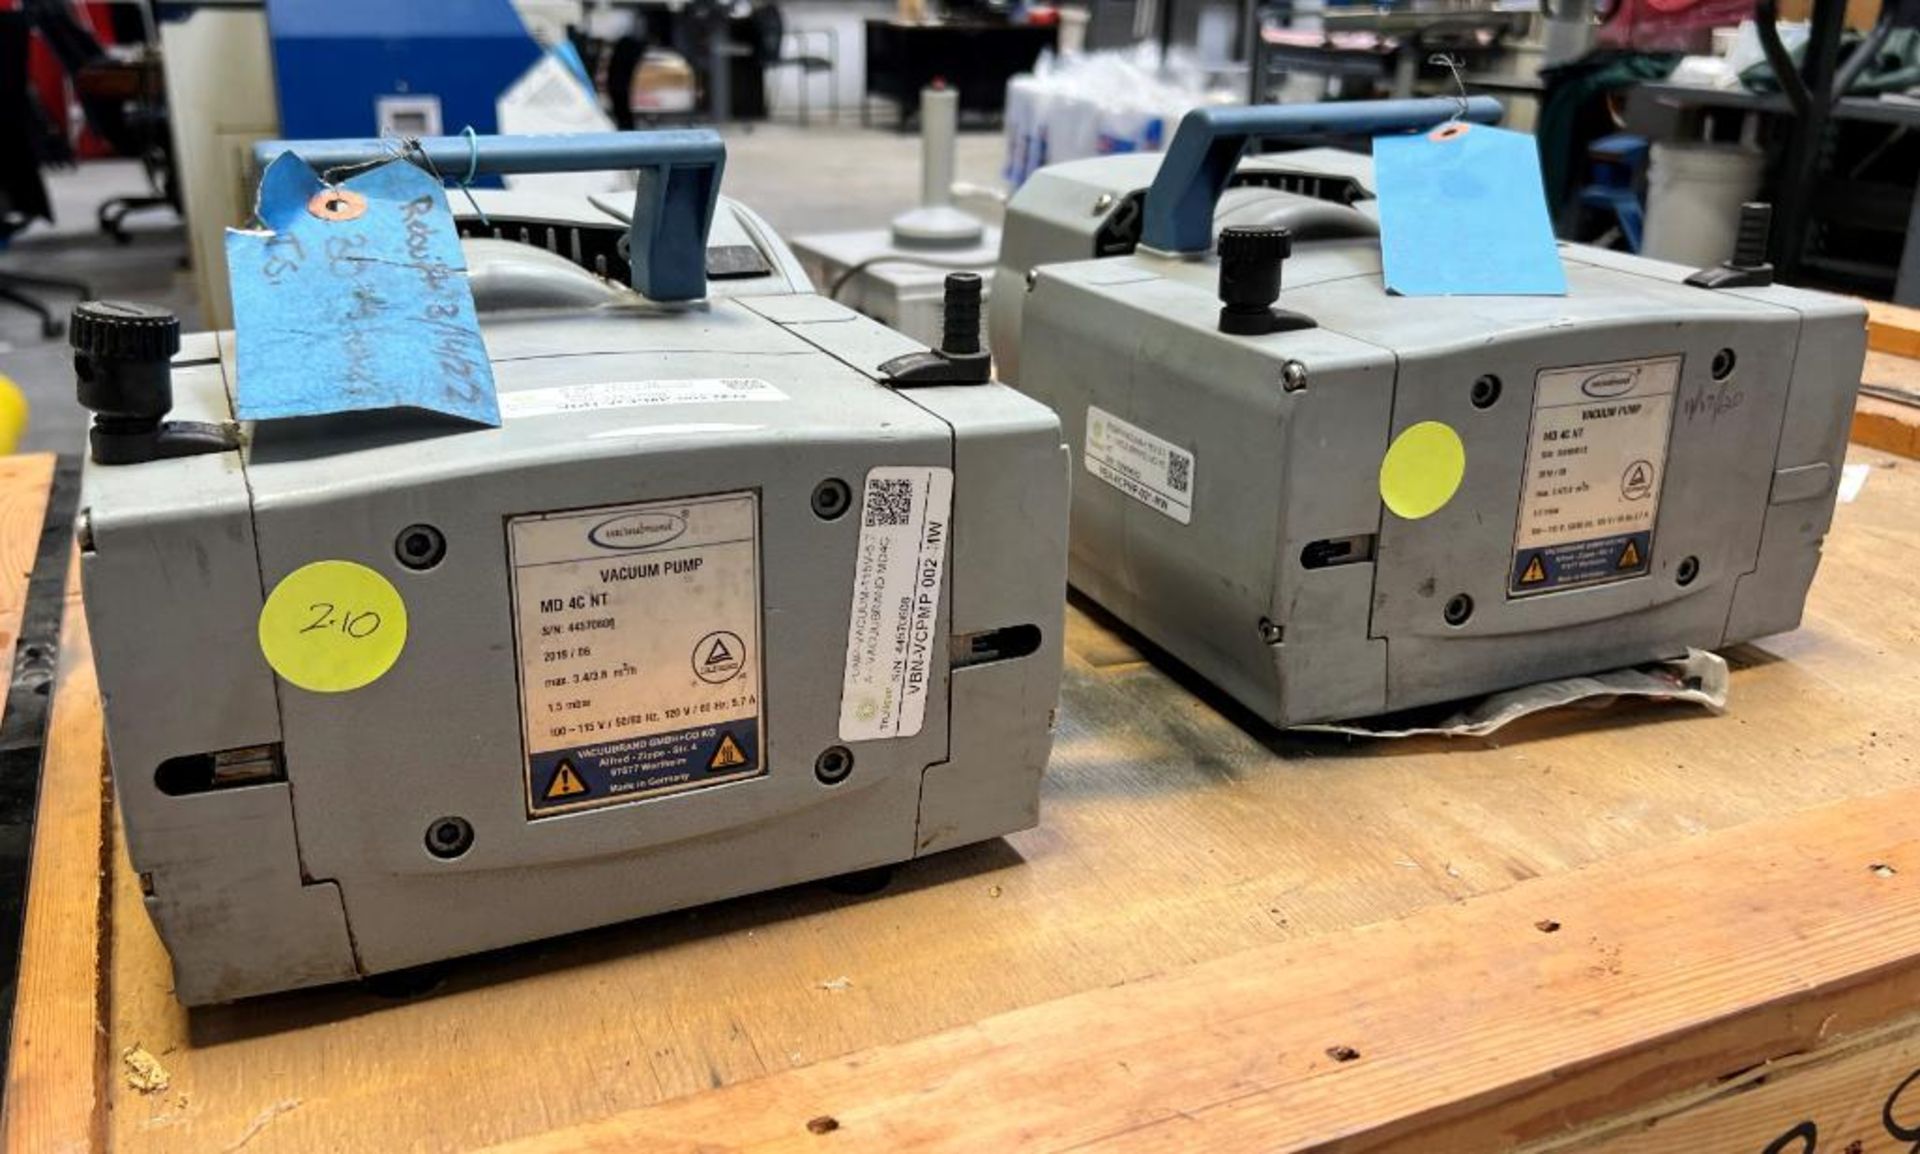 Lot Of (2) Vacuubrand Chemistry Diaphragm Pumps, Model MD4CNT, Serial# 102494512 & 44570608. - Image 2 of 7